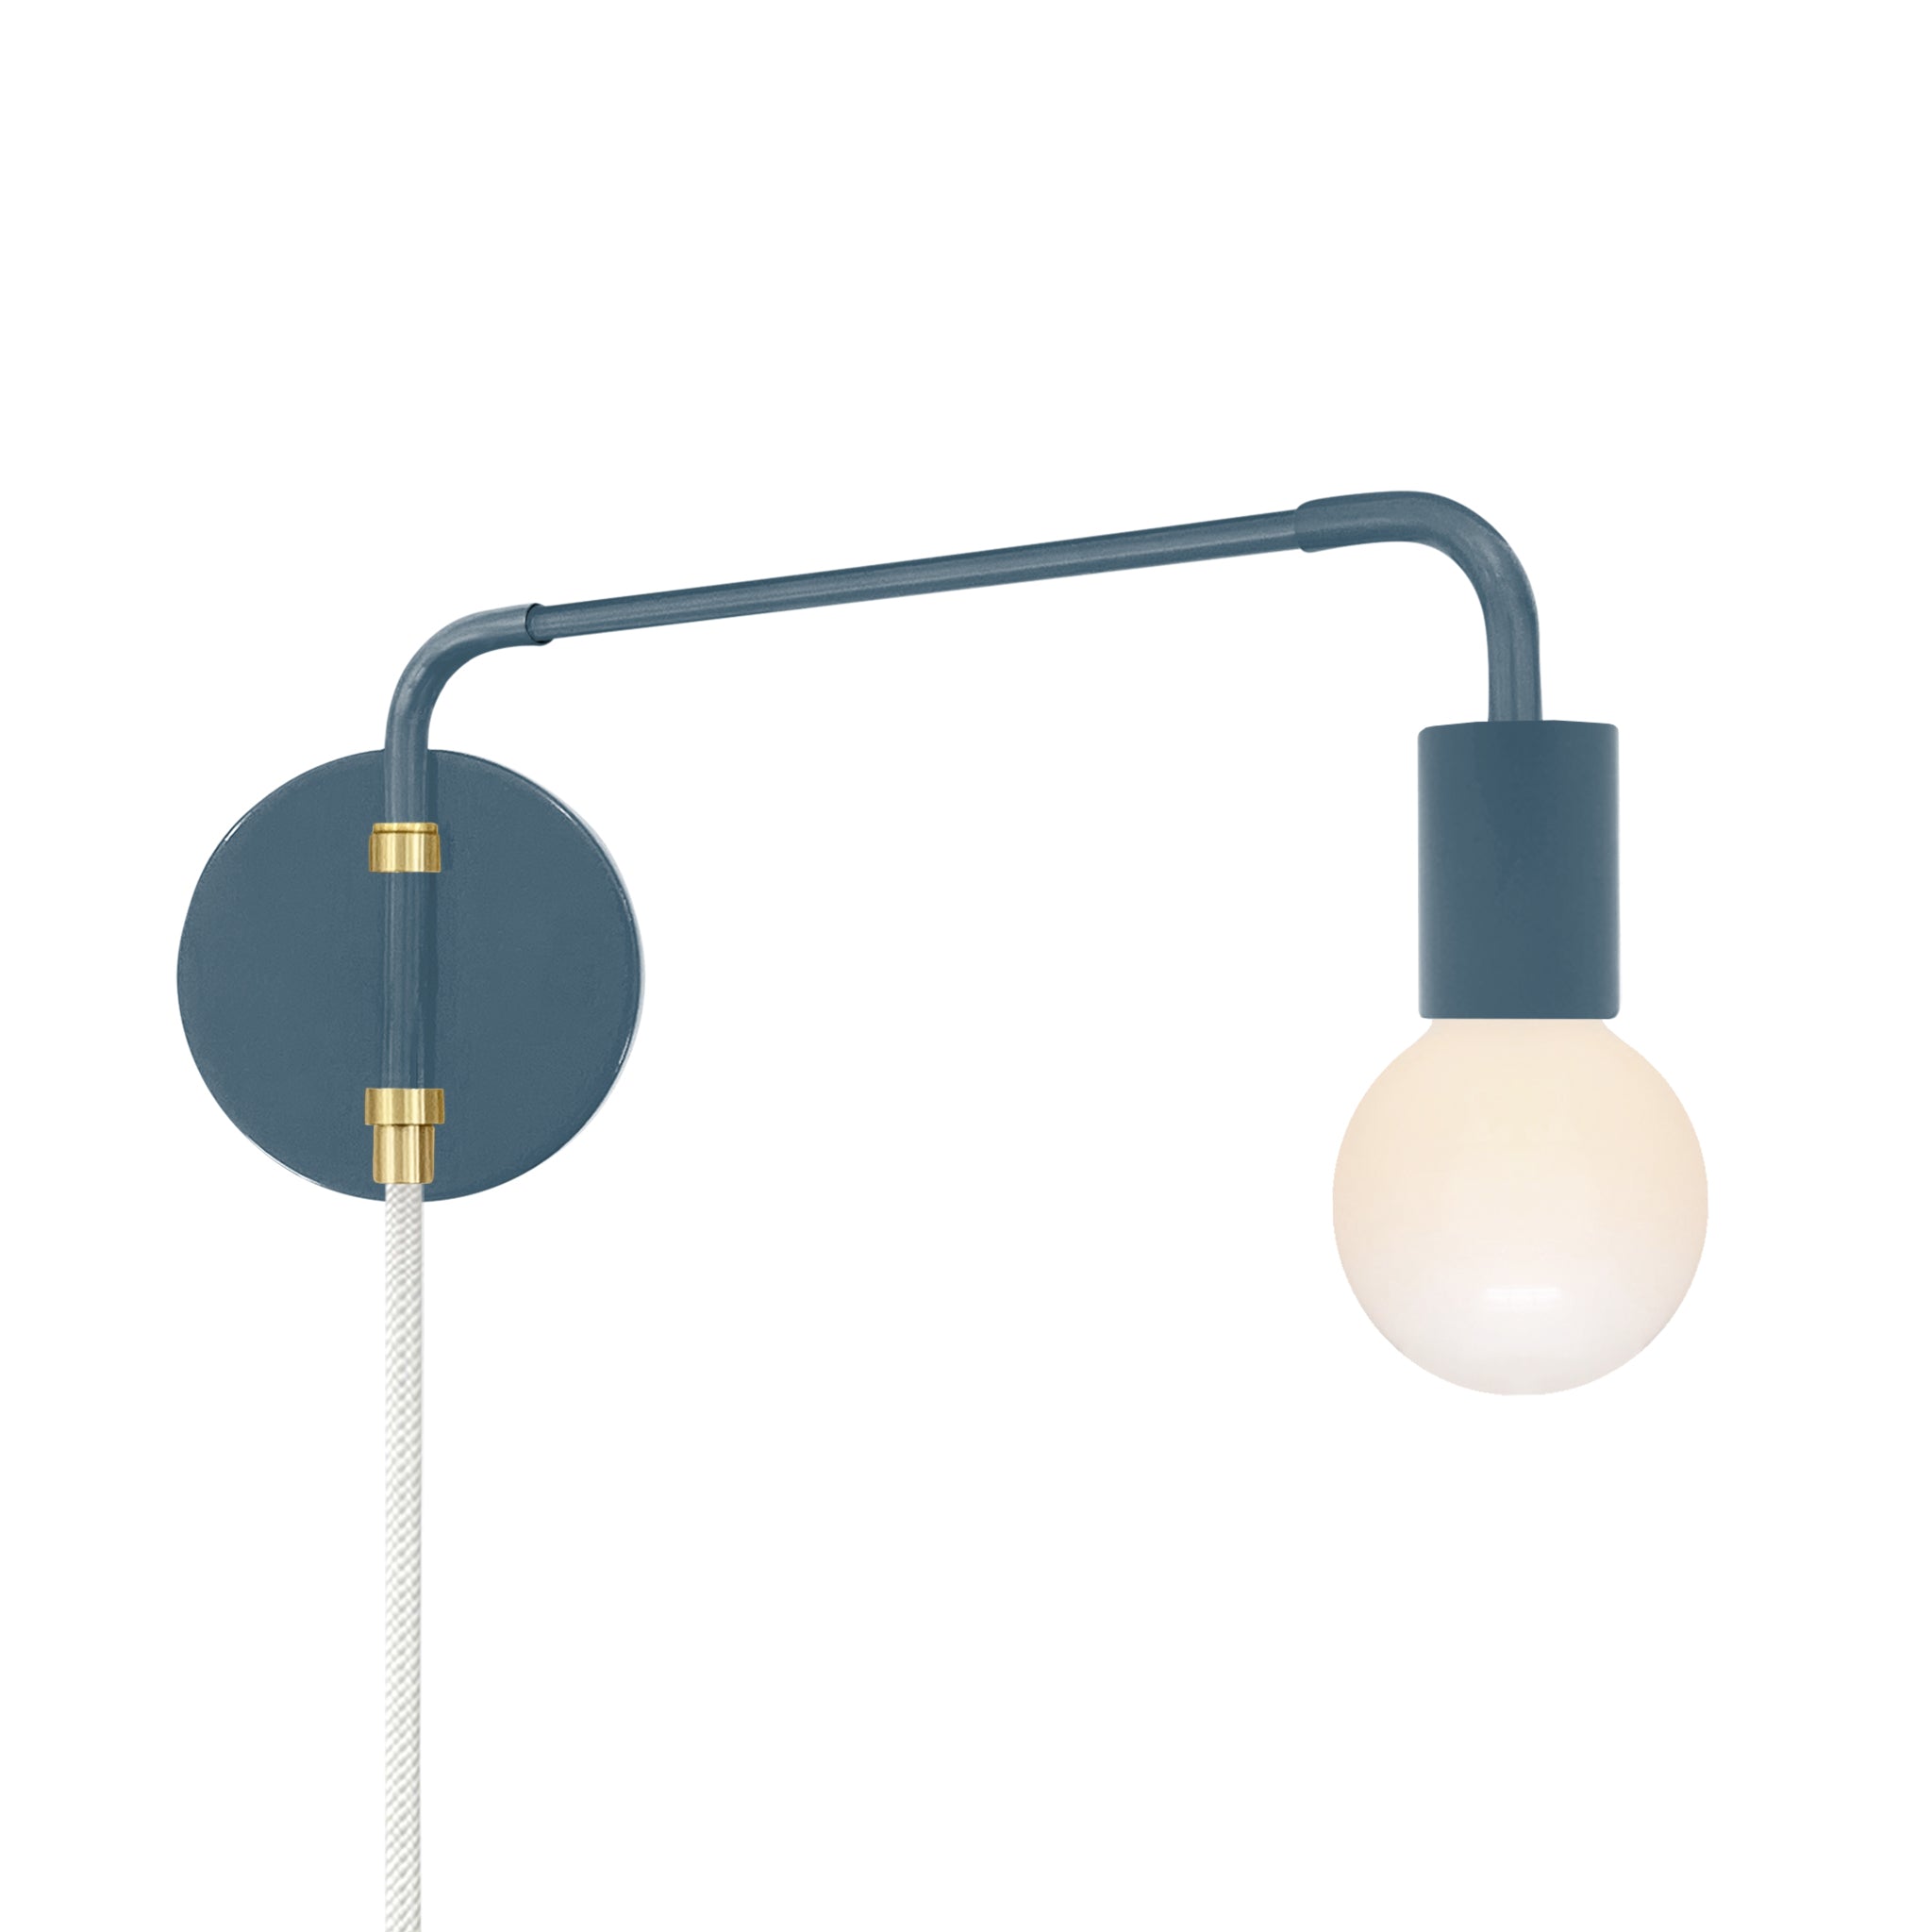 Brass and slate blue color Sway plug-in sconce Dutton Brown lighting